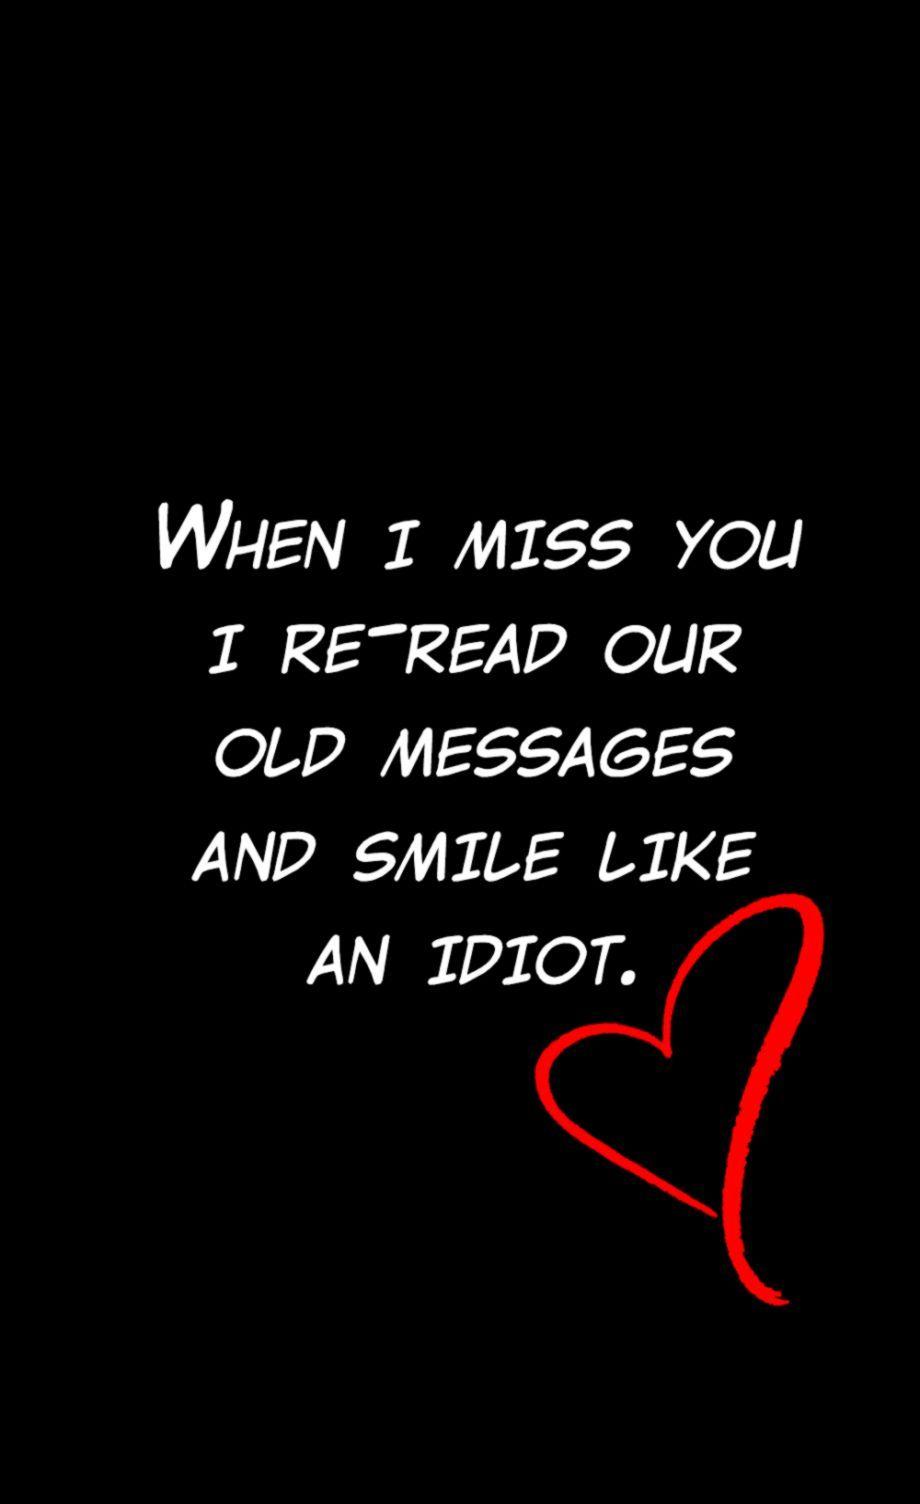 I Miss You Wallpaper For Mobile